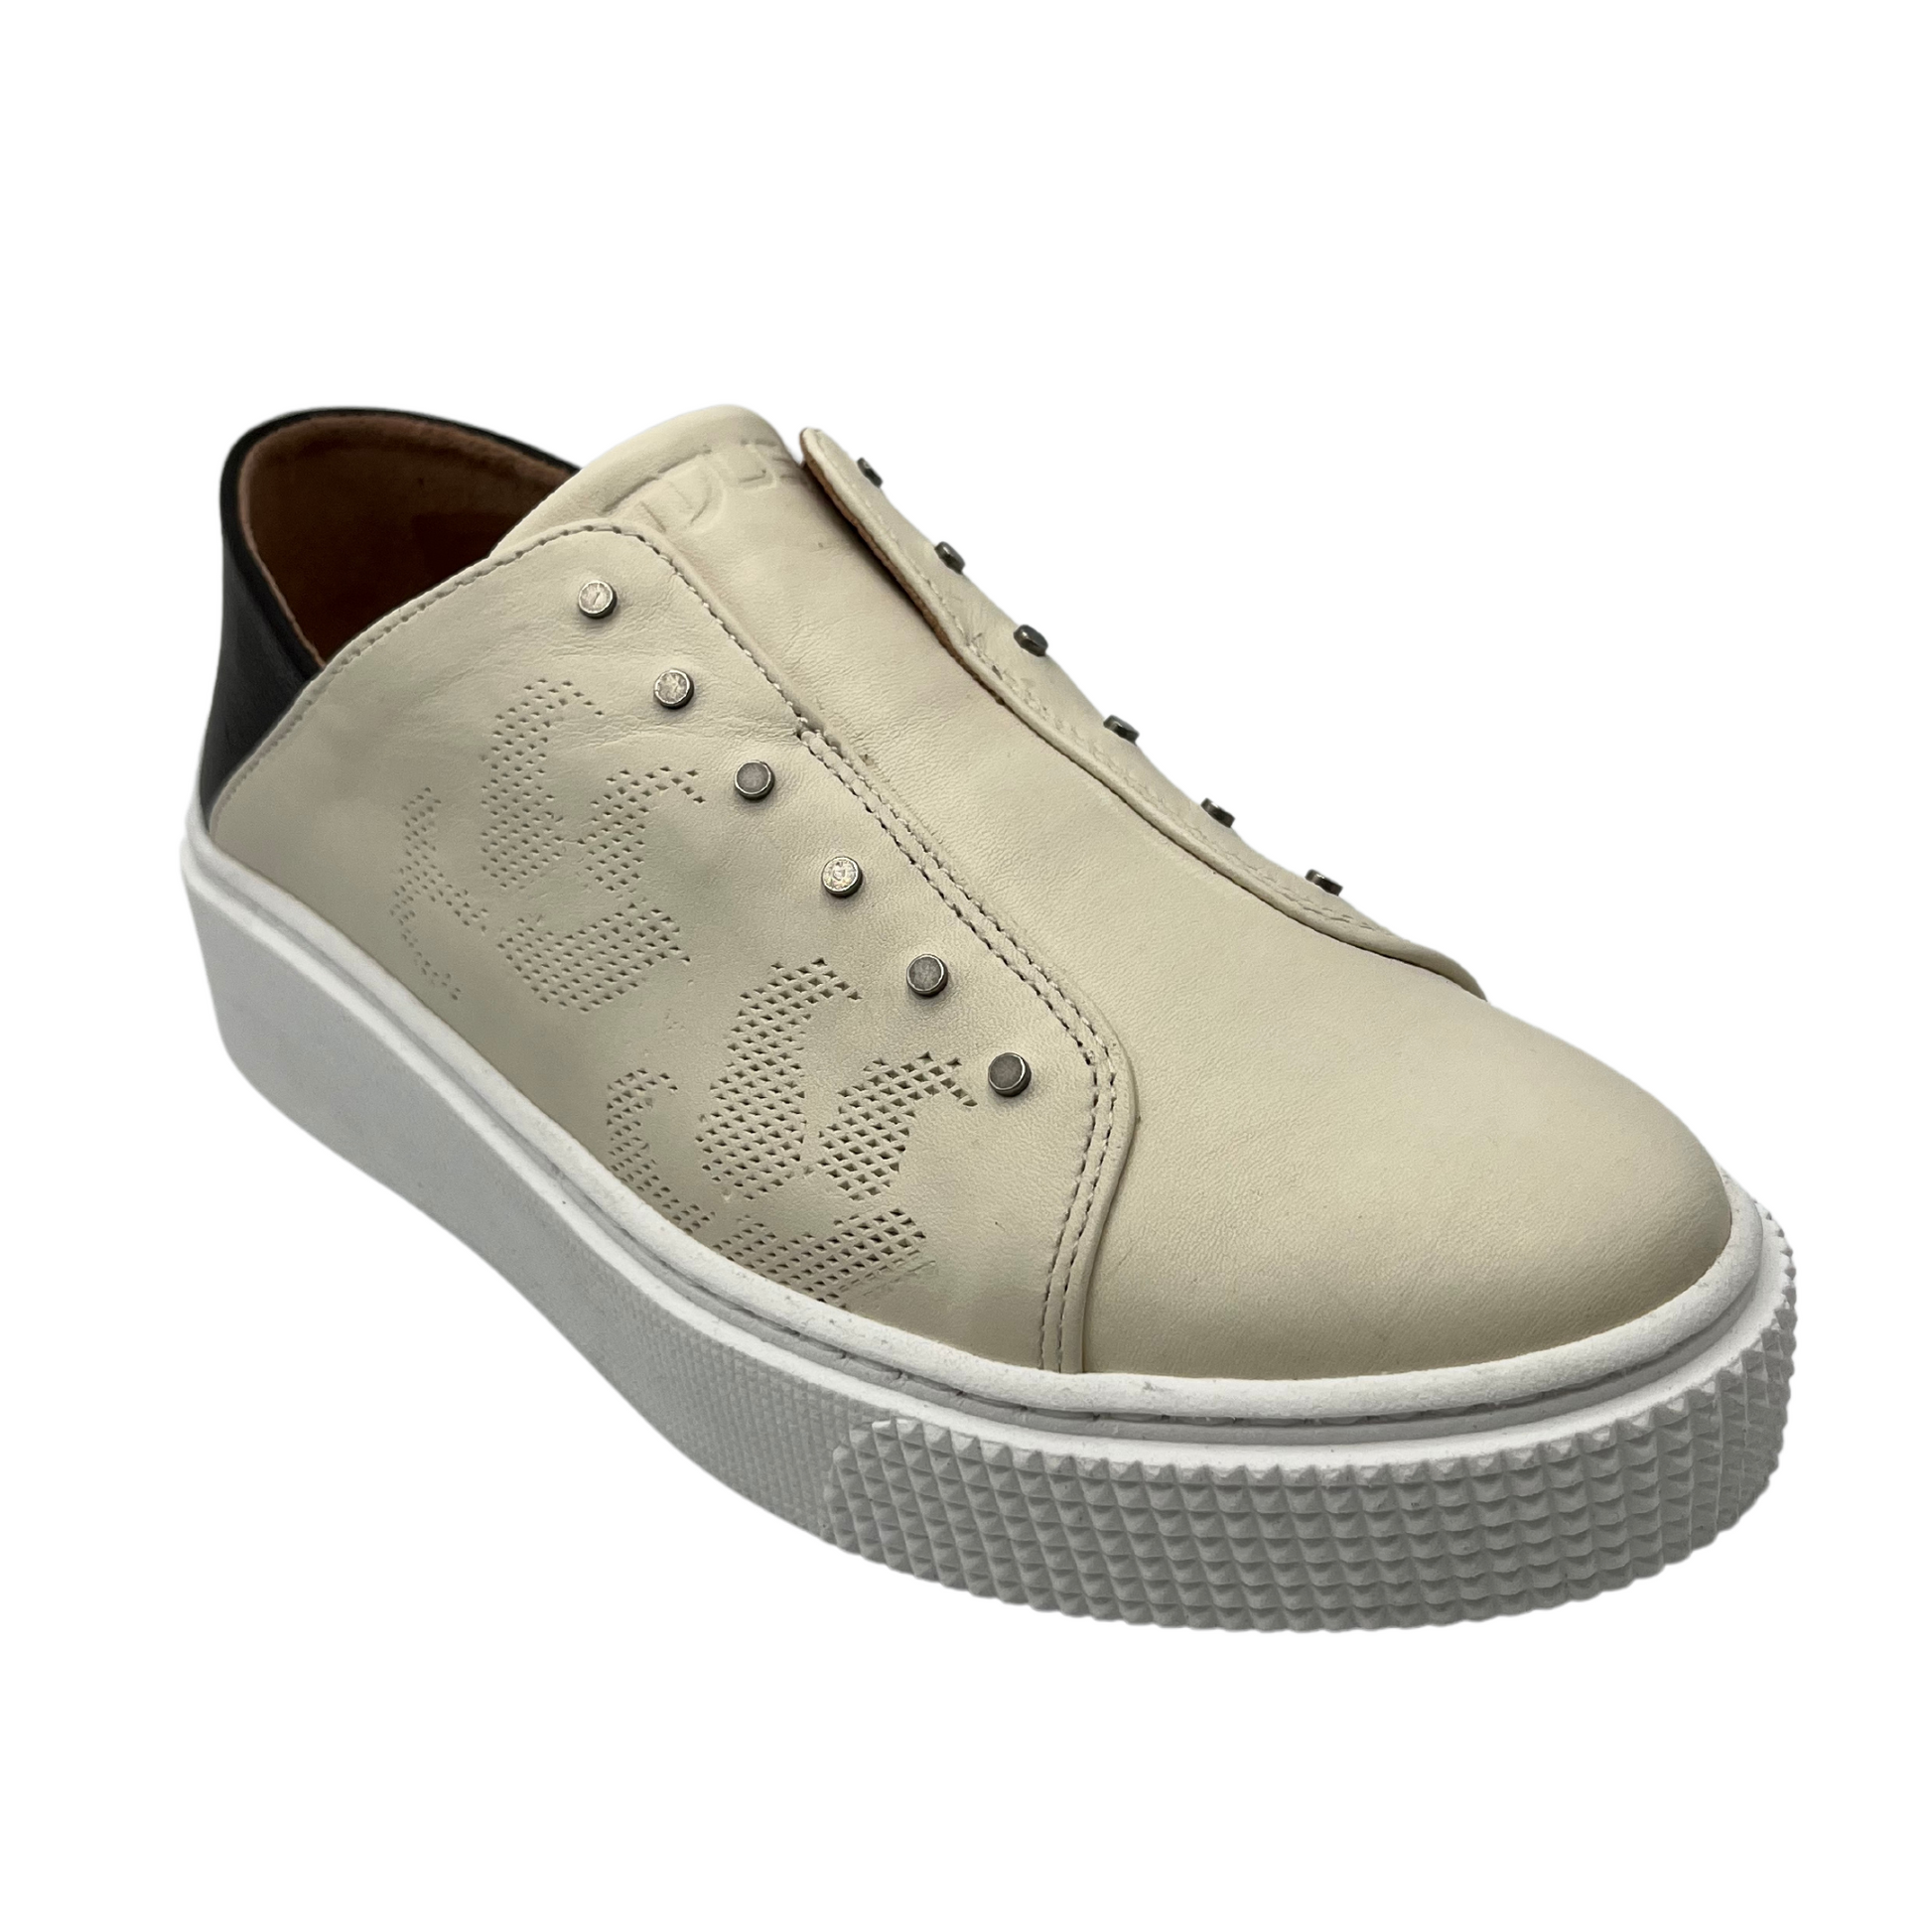 45 degree angled view of latte coloured sneaker with black heel cap